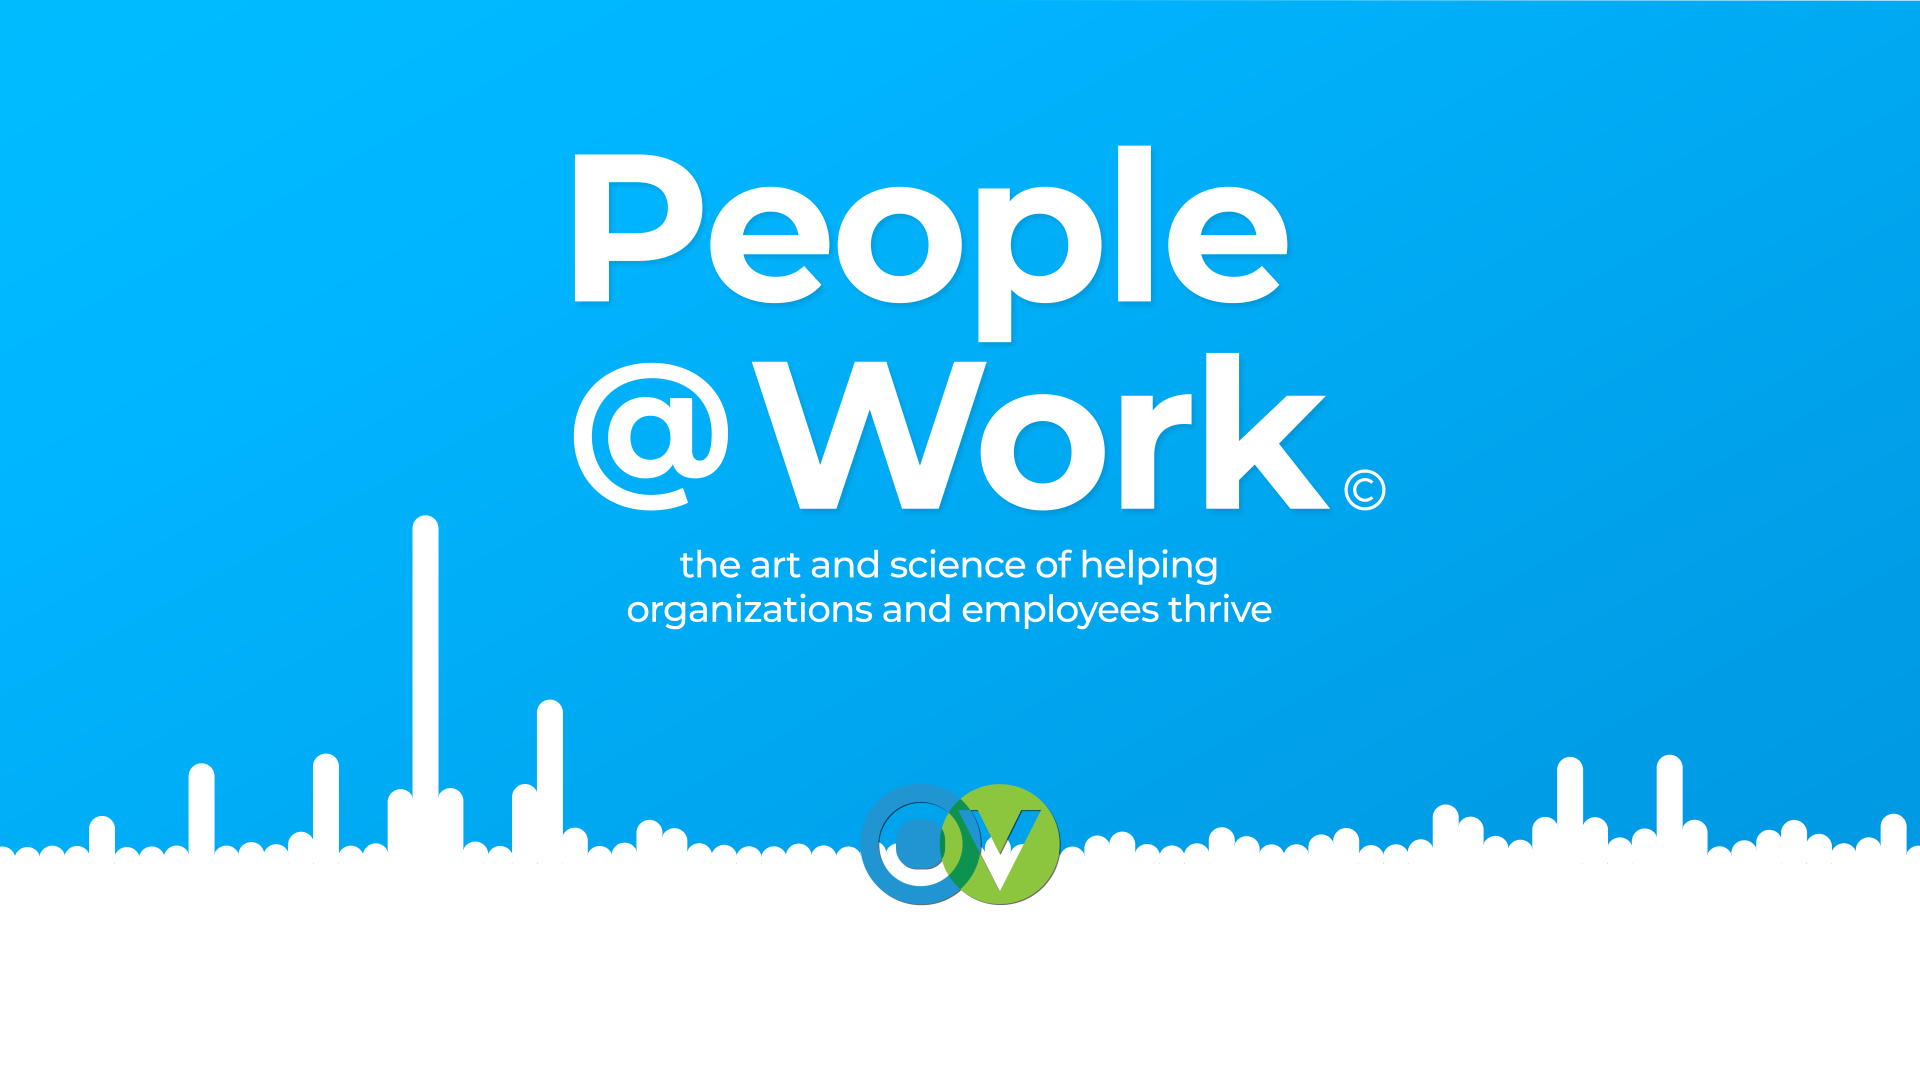 People @Work - Are You Listening to Your Employees Right Now?